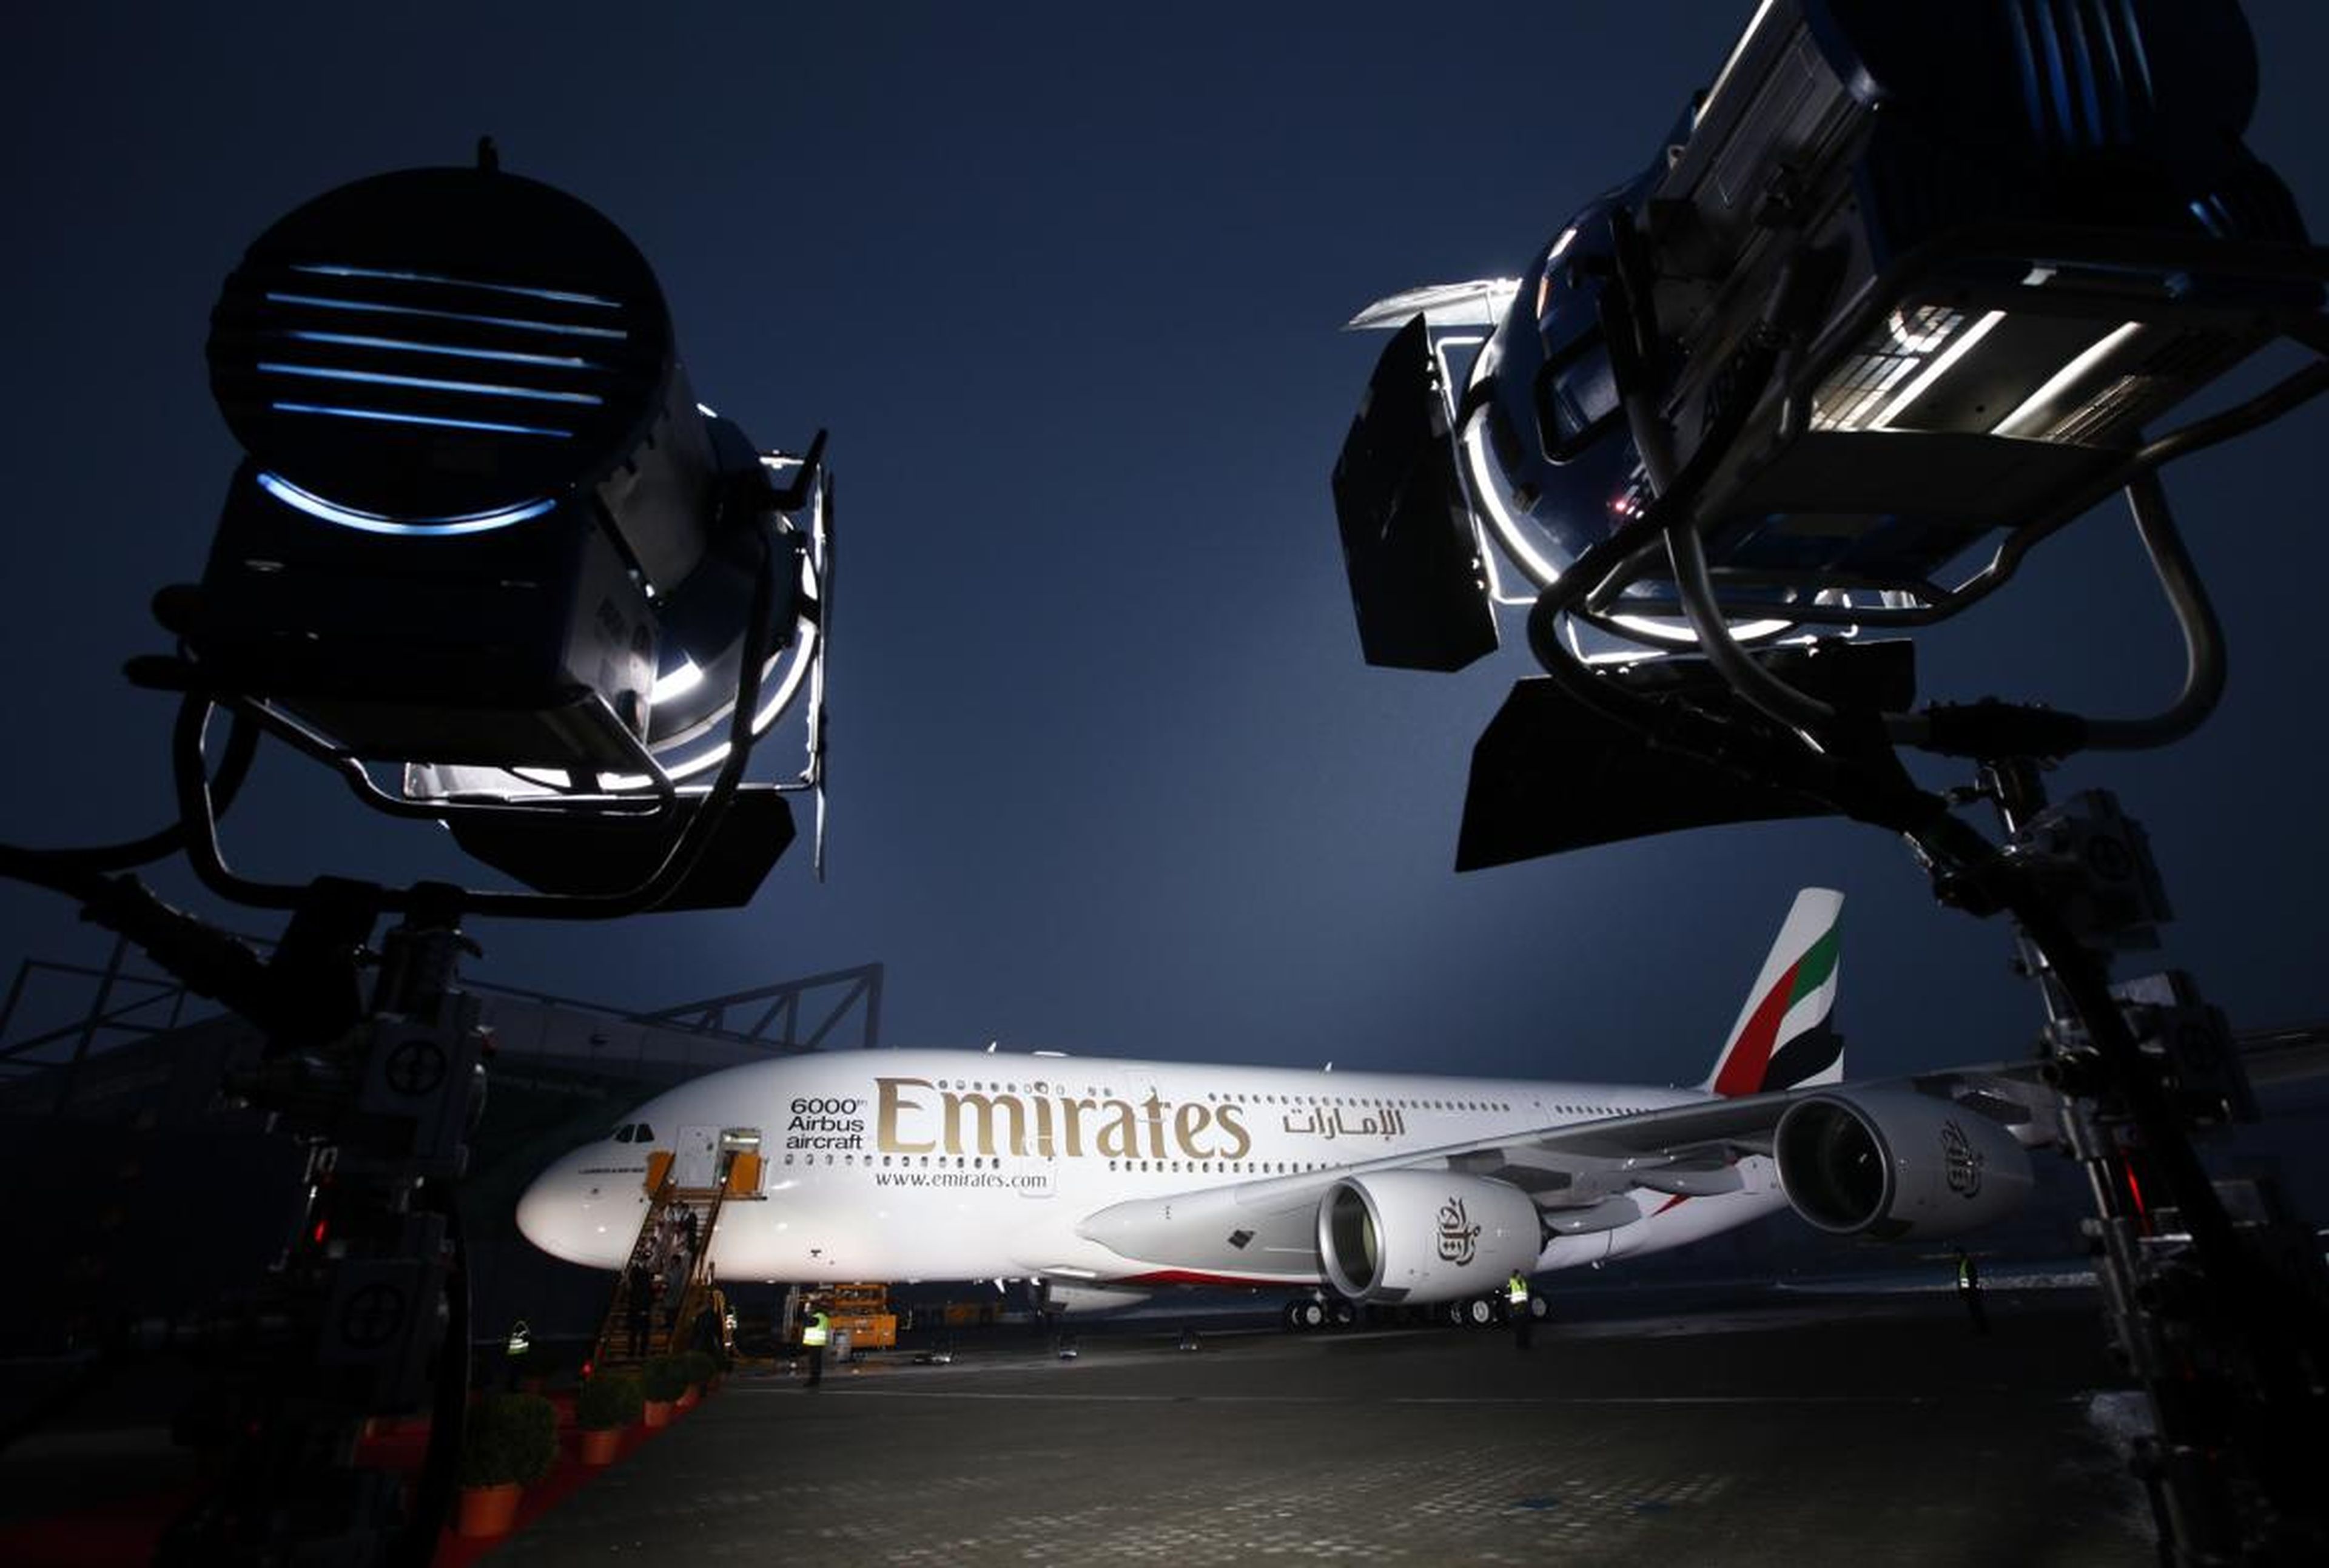 Emirates accounts for 123 of the 274 of the A380s ever ordered.